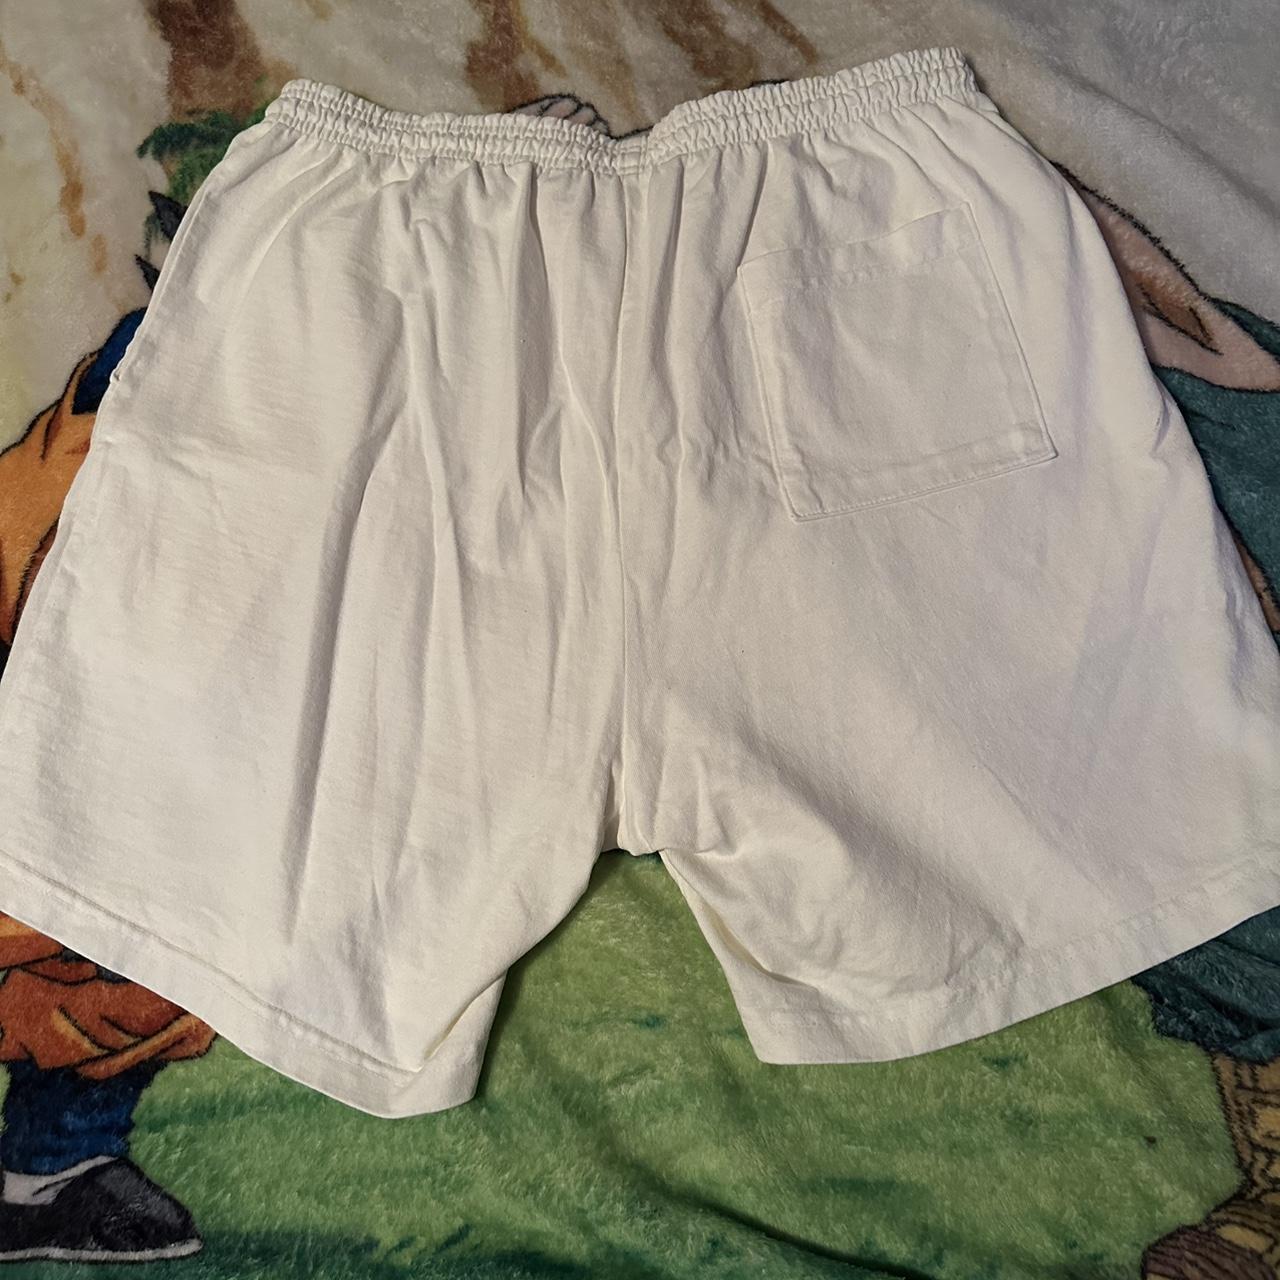 Men's White and Yellow Shorts | Depop